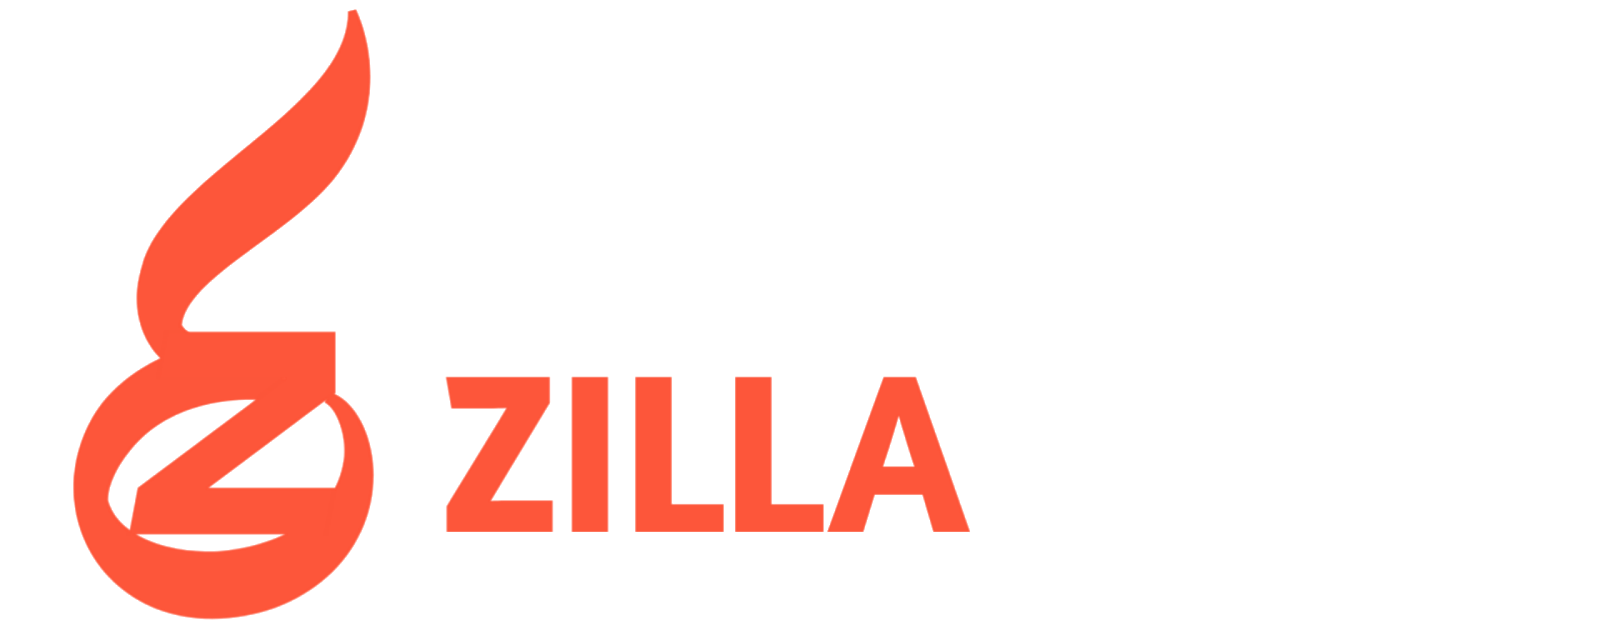 Electrical Zilla - All Electrical Knowledge